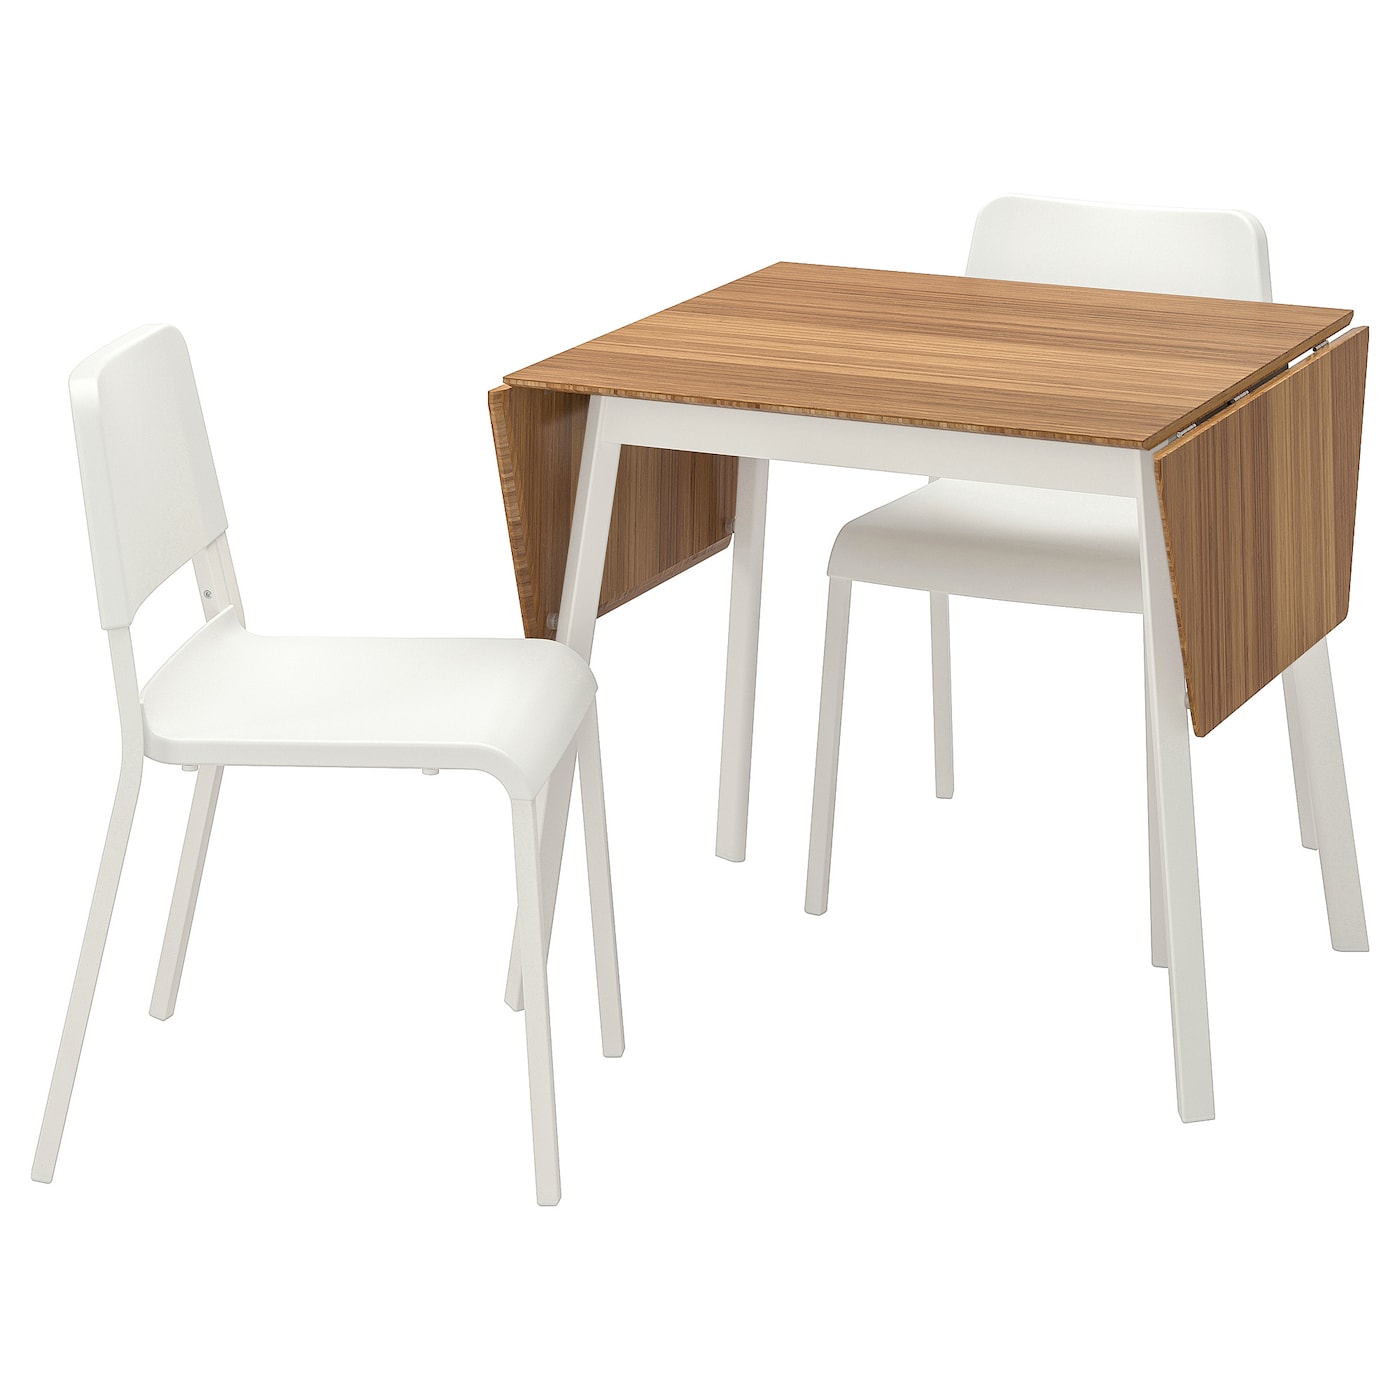 IKEA PS 2012 / TEODORES table and 2 chairs bamboo white/white - IKEA